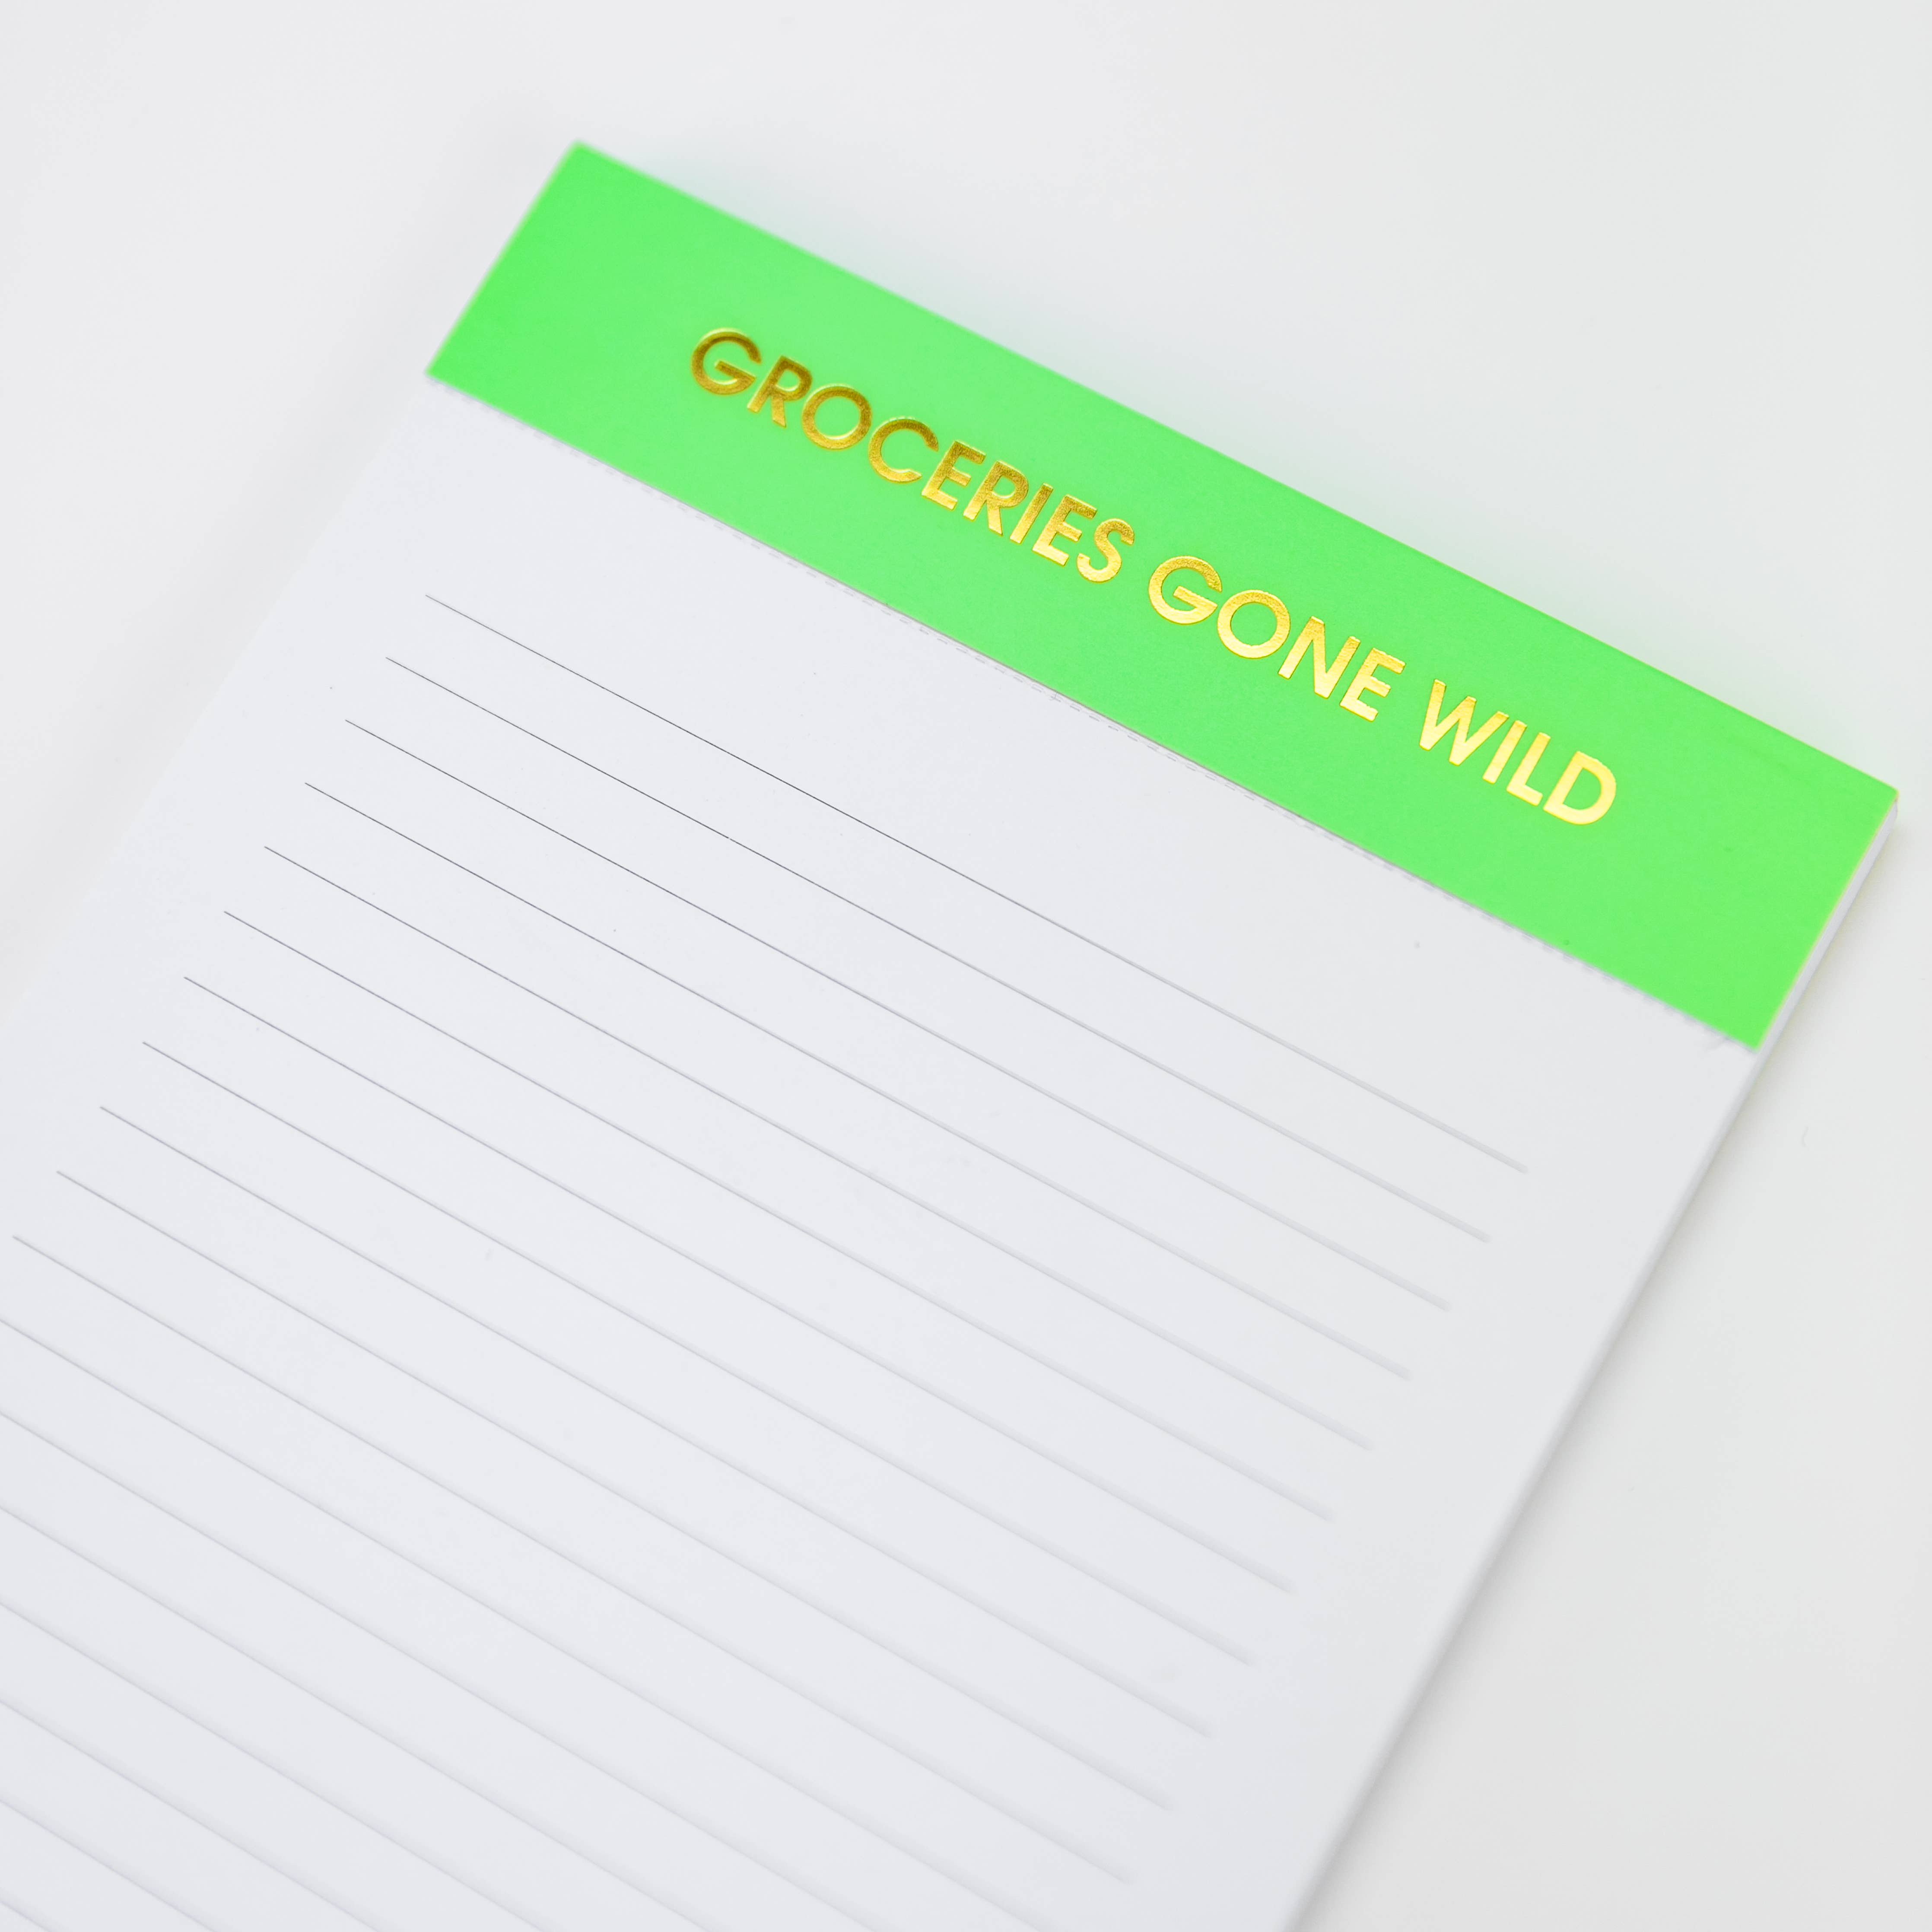 Groceries Gone Wild Notepad